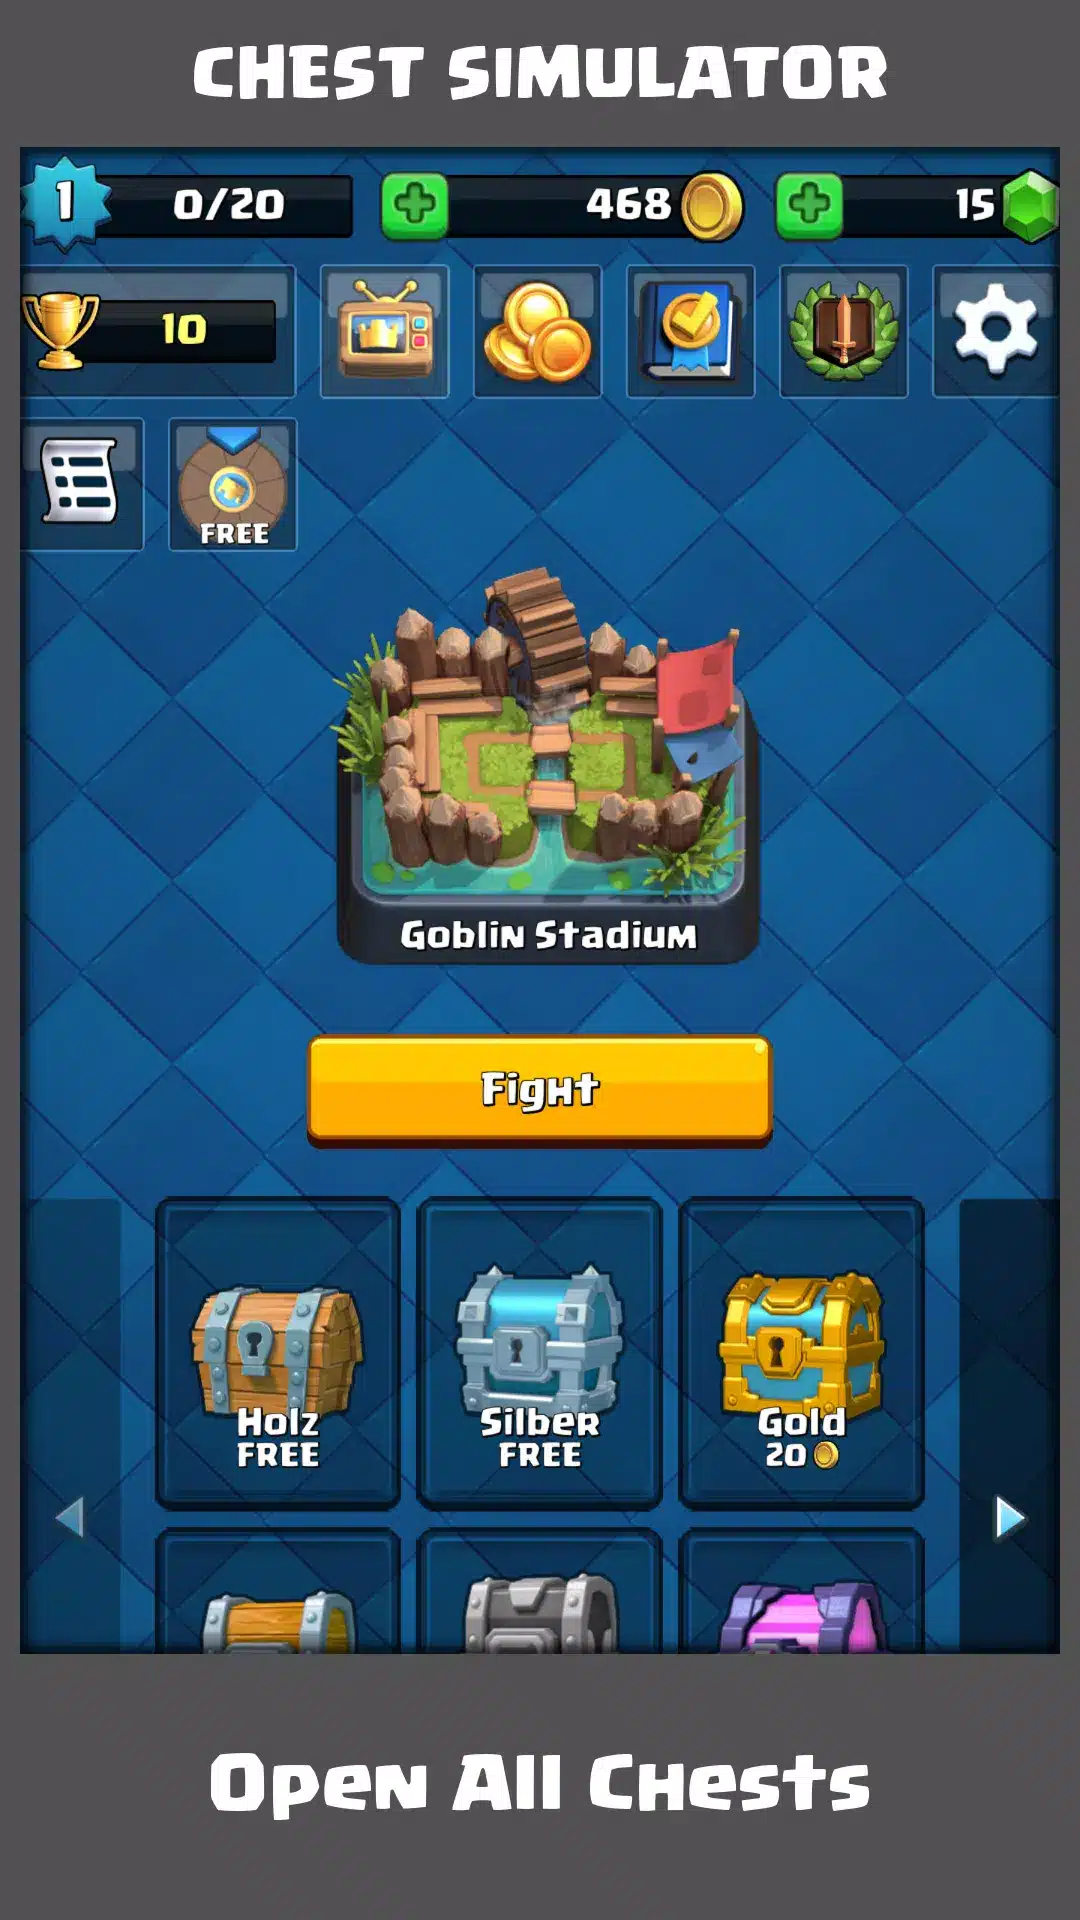 Chest Simulator for Clash Royale Image 1